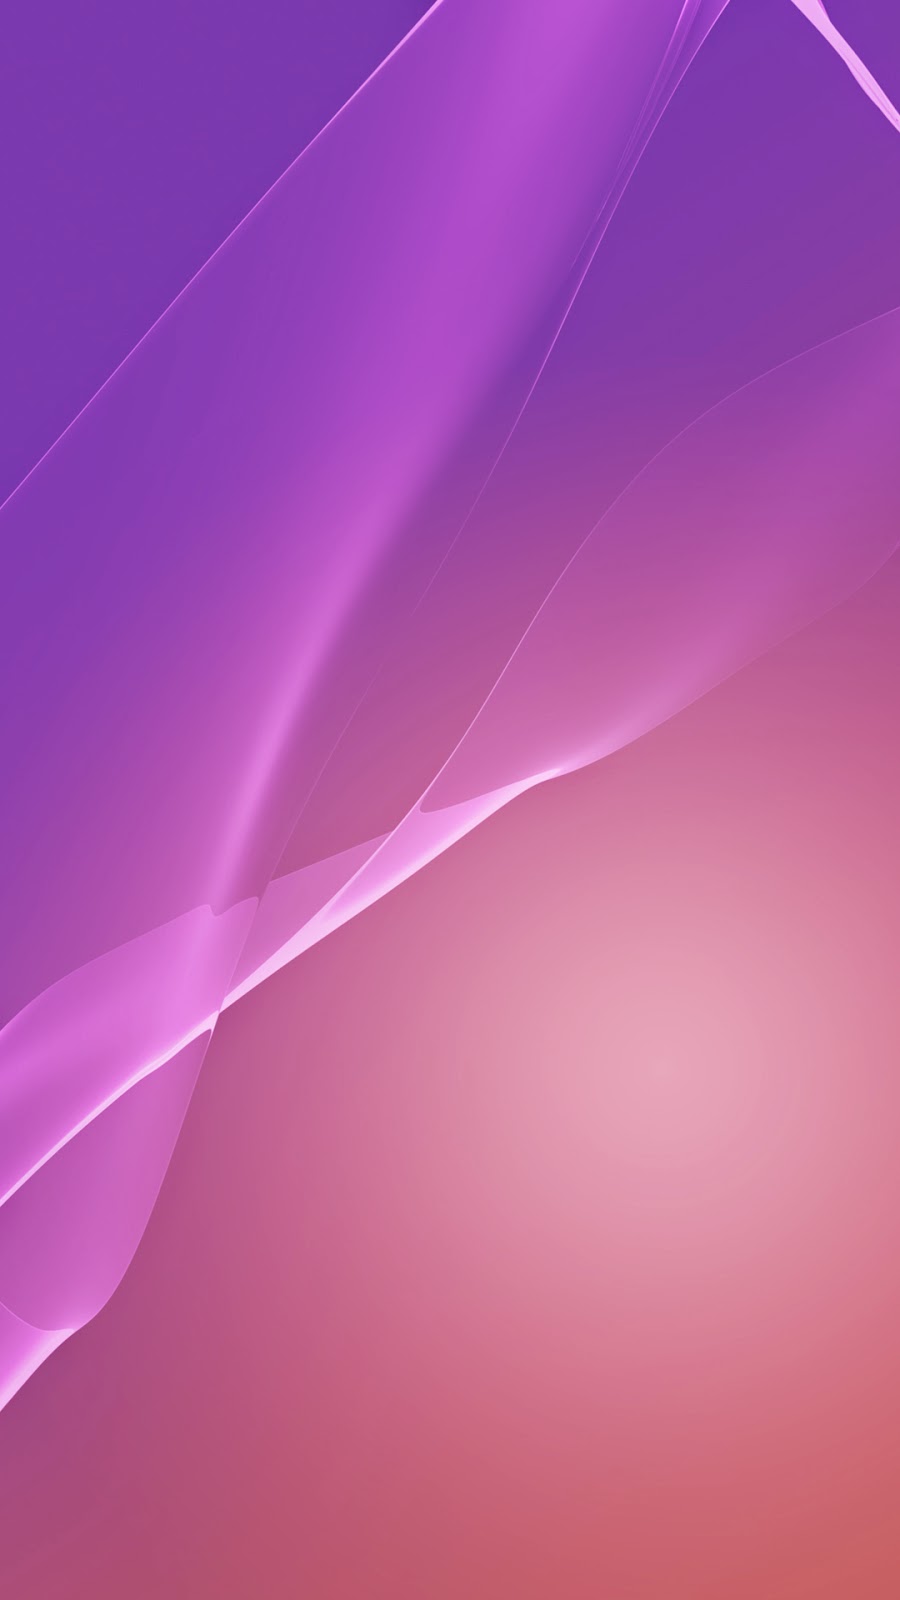 sony xperia wallpaper download,violet,pink,purple,lilac,magenta